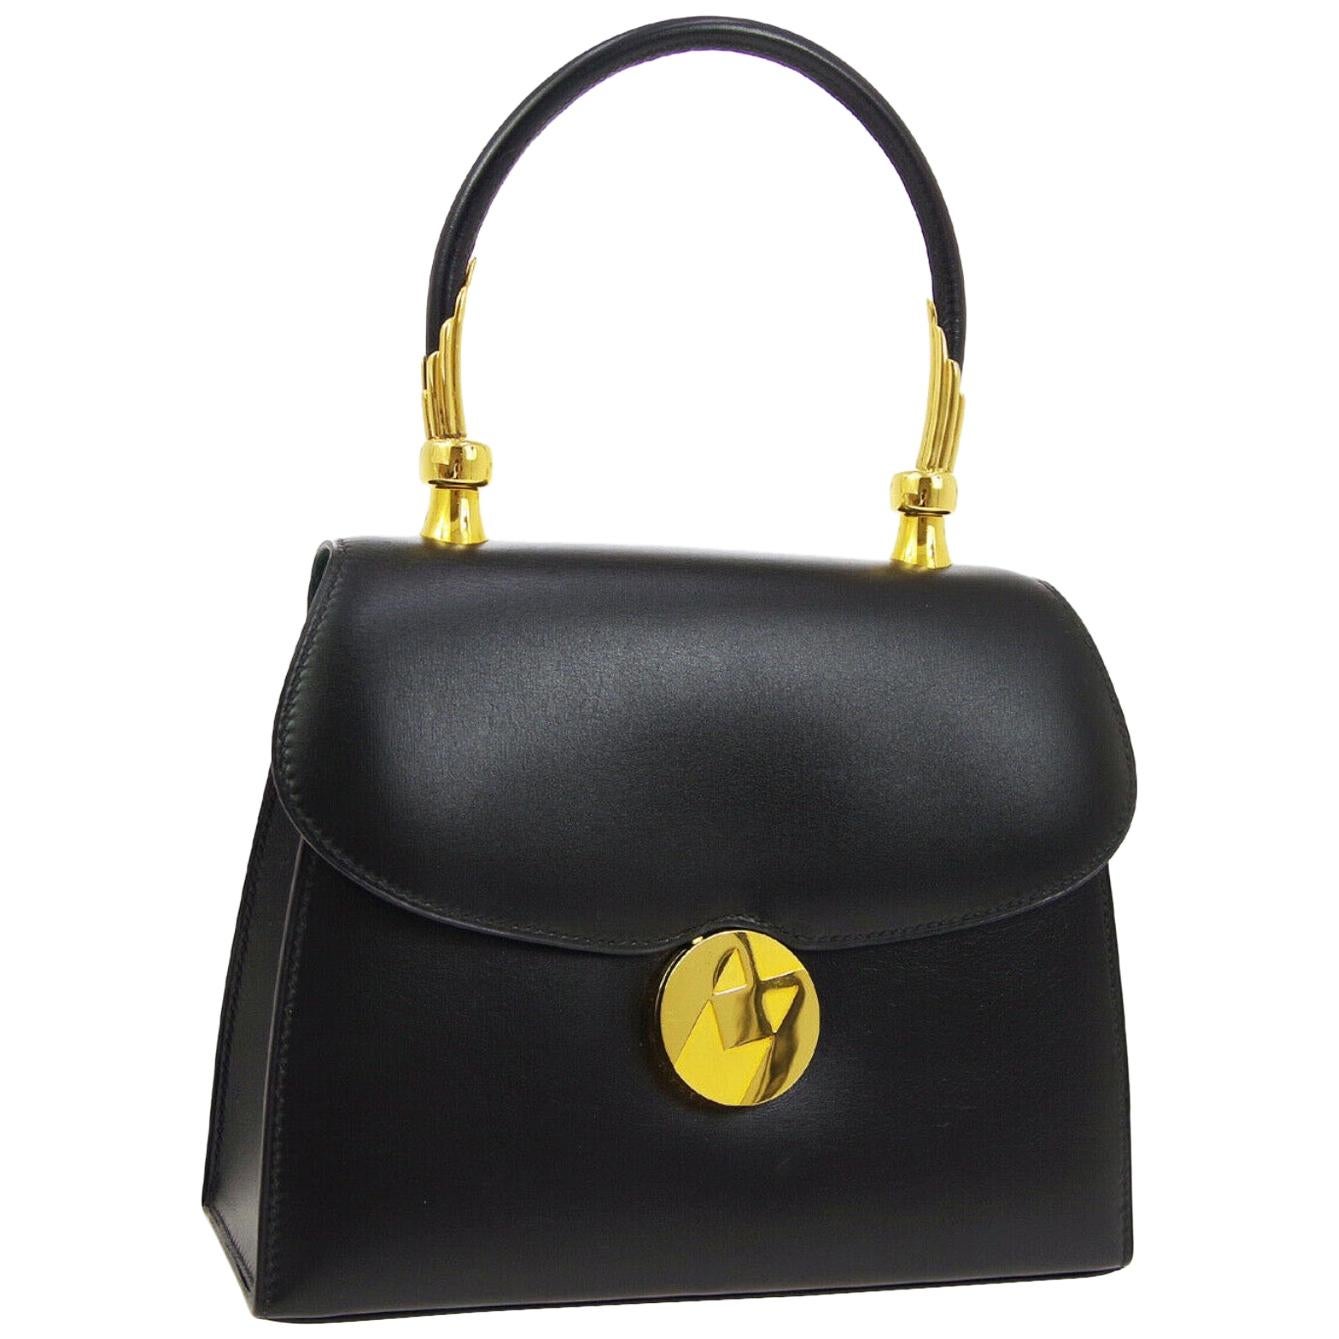 Hermes Black Leather Gold Kelly Style Small Evening Top Handle Satchel Flap Bag